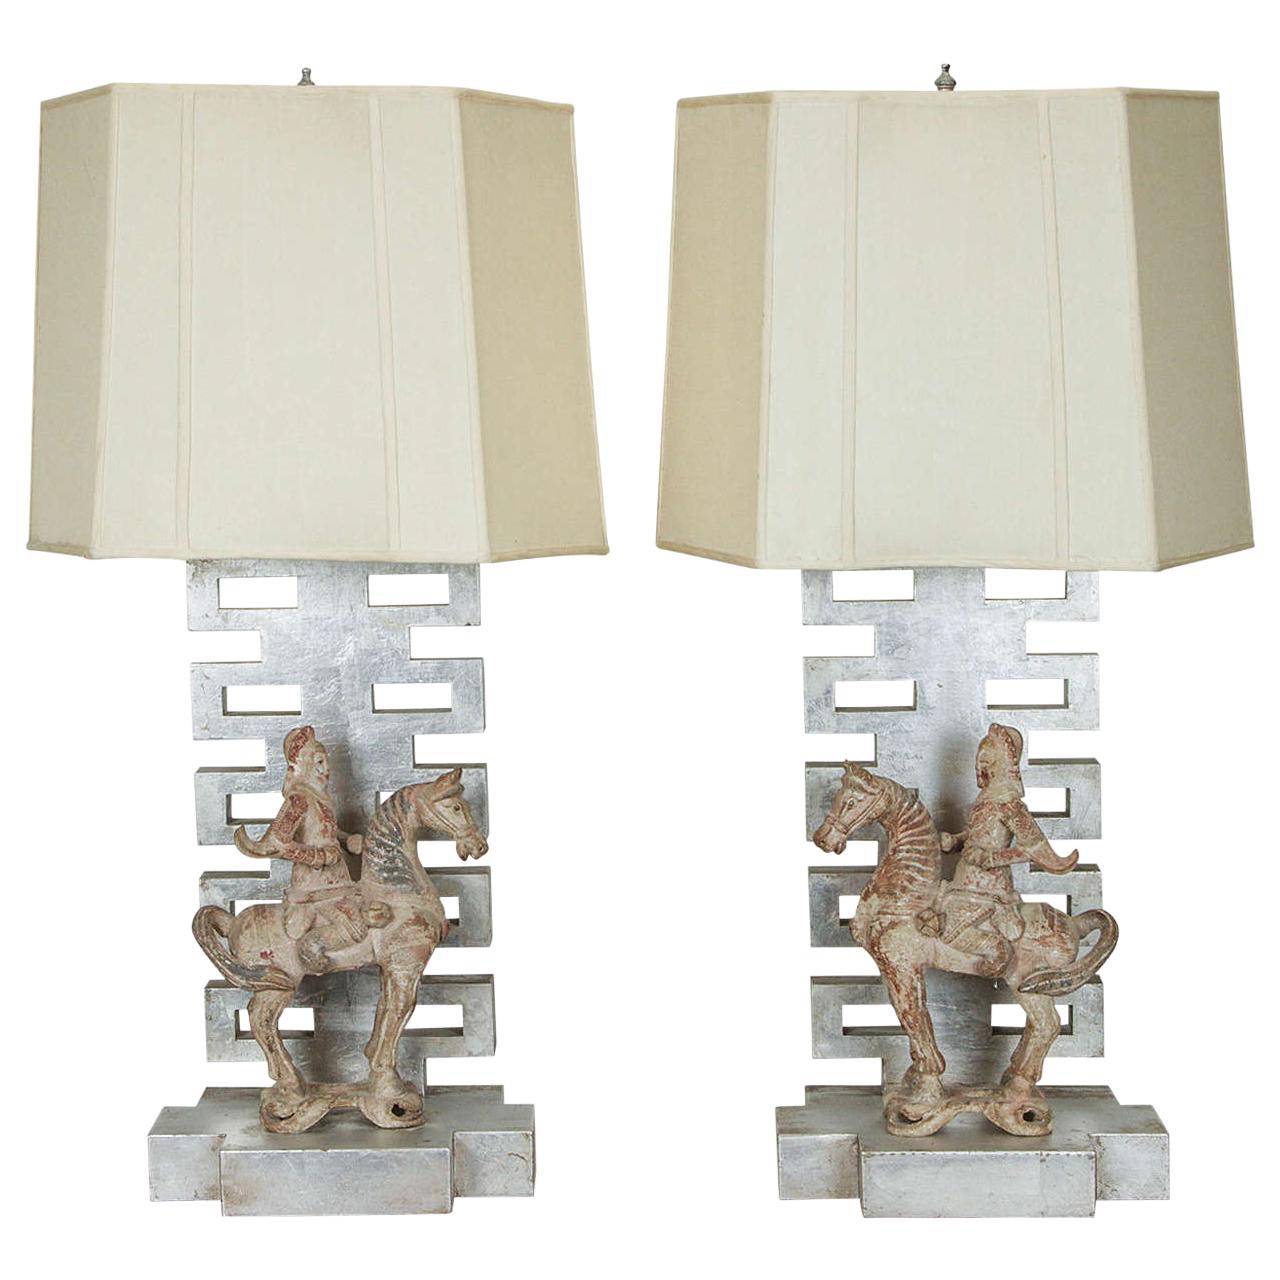 Rare Pair of Lamps by James Mont with Chinese Warrior Figures For Sale